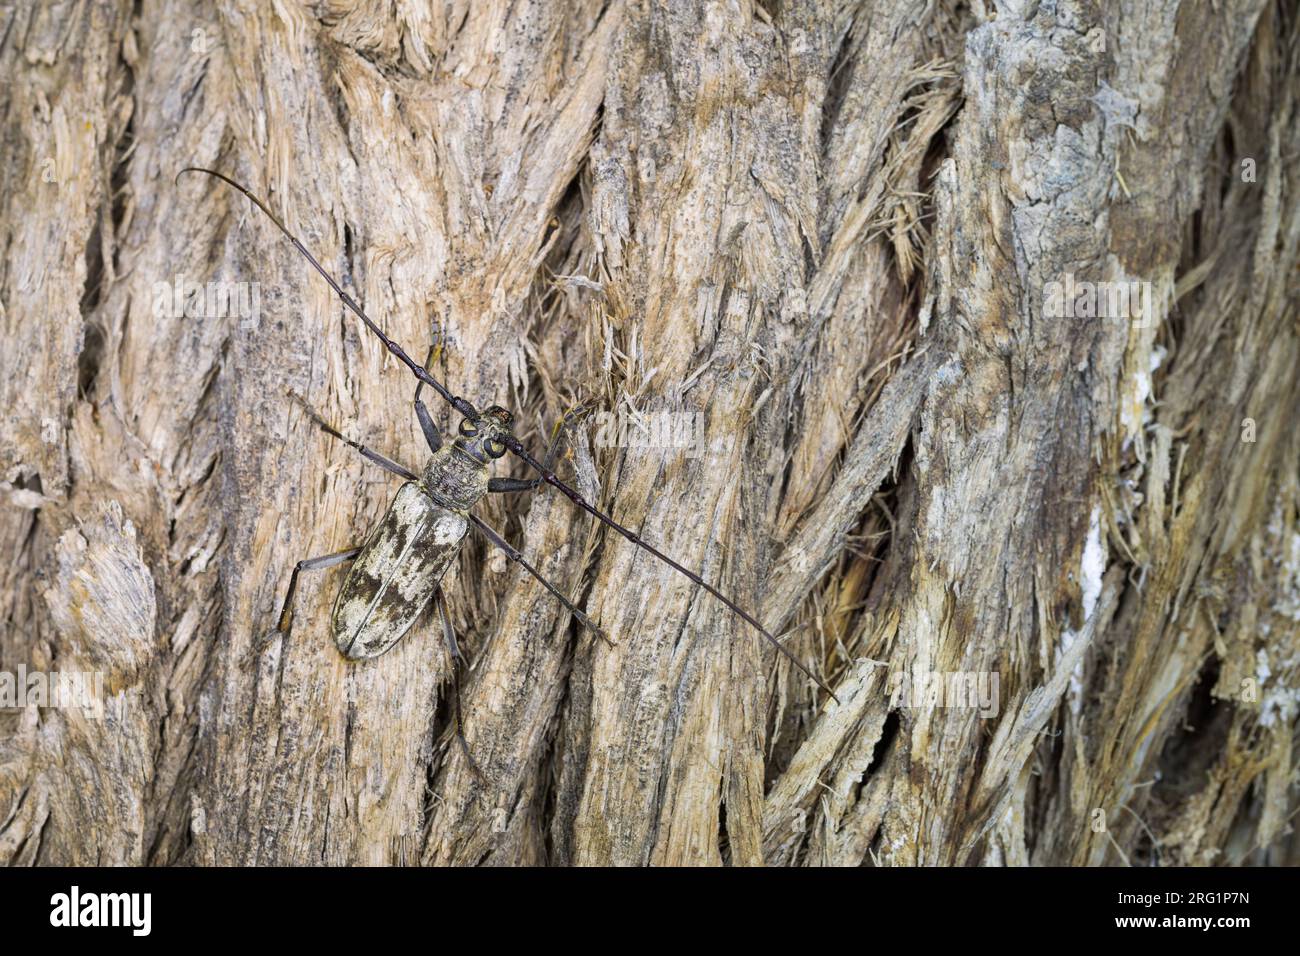 City Long-horn Beetle (Aeolesthes sarta) in forest in Tajikistan. Sitting on the bark of an old tree. Stock Photo